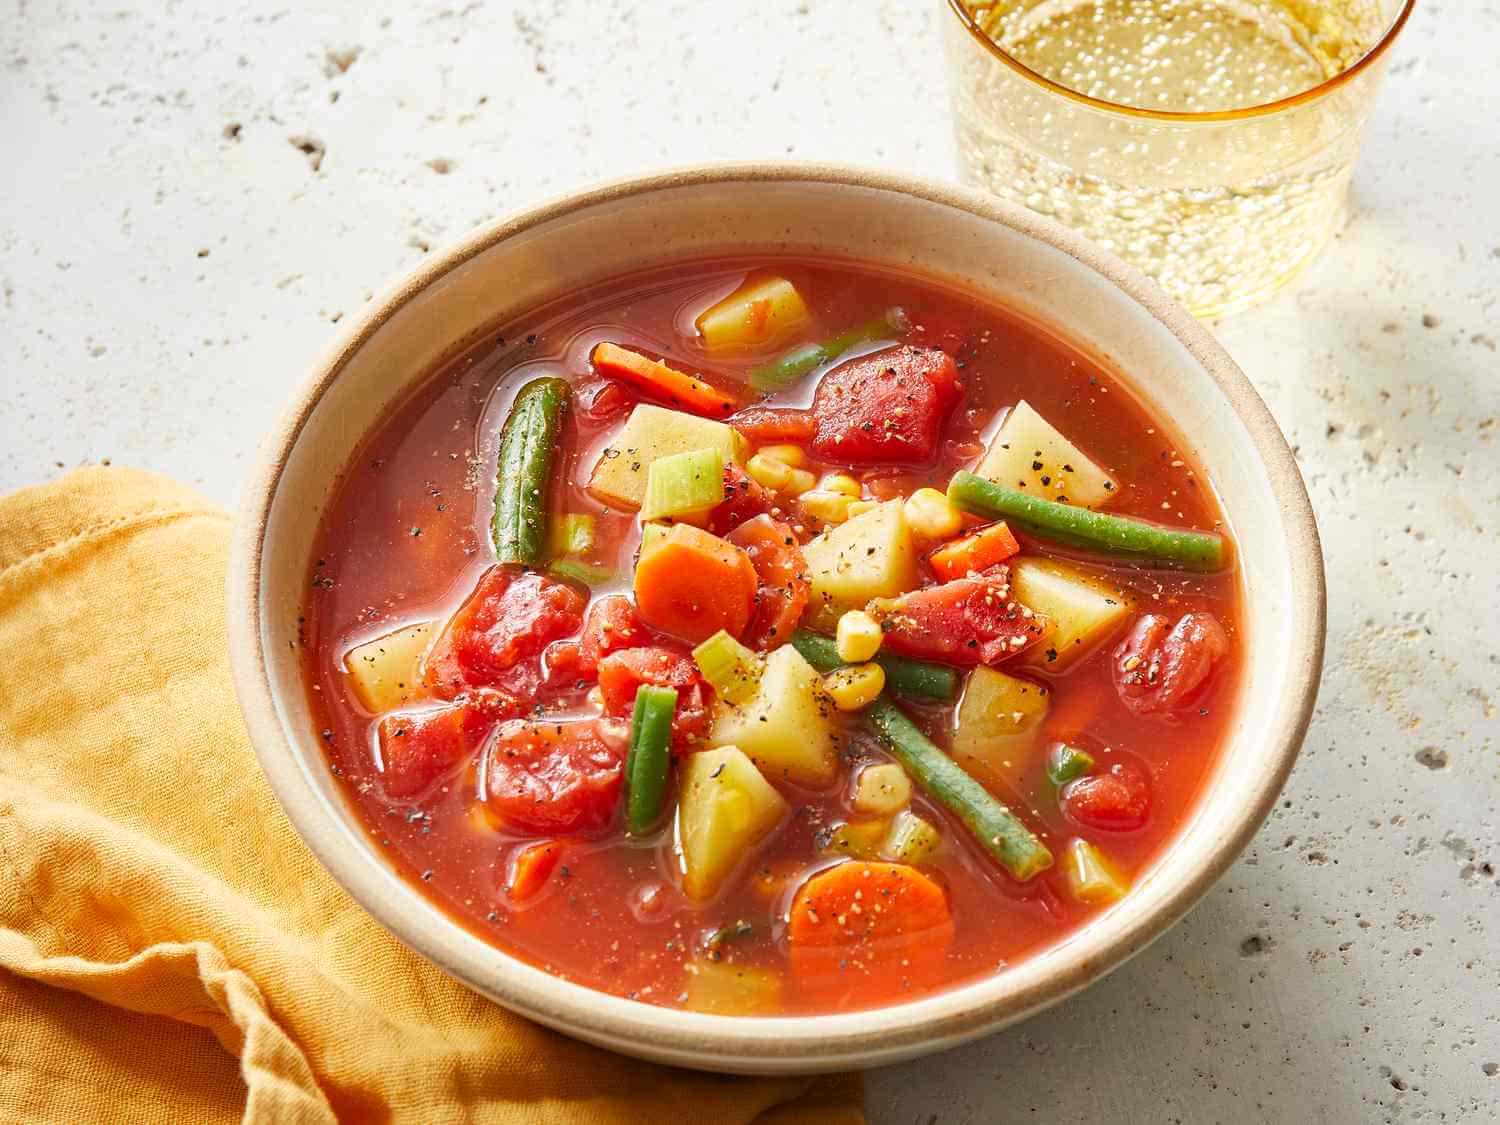 tryoutthis5vegetablesoupsthiswinter